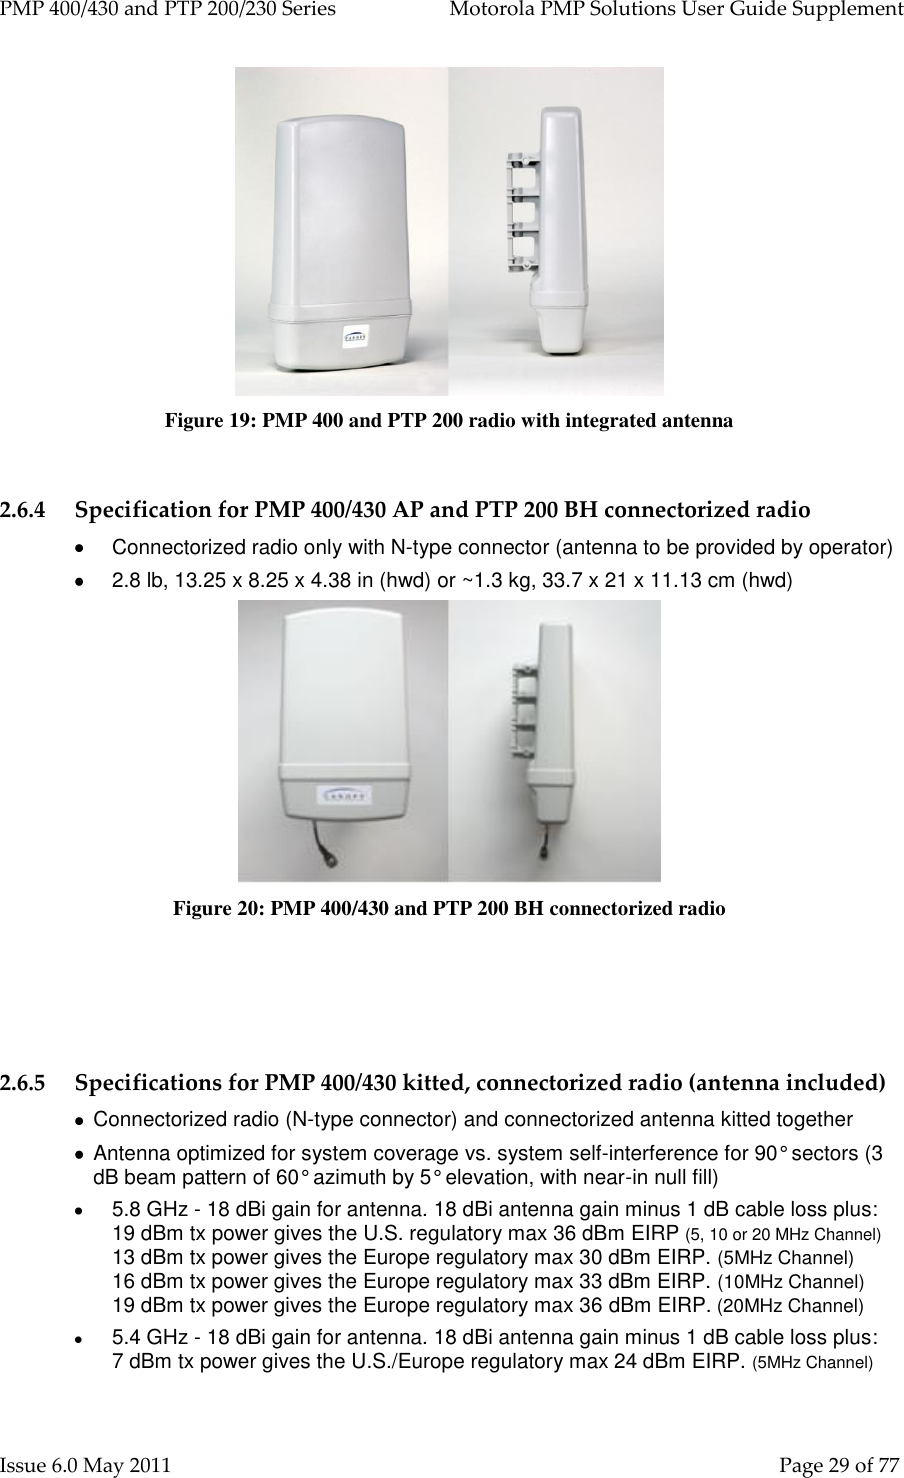 PMP 400/430 and PTP 200/230 Series   Motorola PMP Solutions User Guide Supplement Issue 6.0 May 2011    Page 29 of 77  Figure 19: PMP 400 and PTP 200 radio with integrated antenna  2.6.4 Specification for PMP 400/430 AP and PTP 200 BH connectorized radio   Connectorized radio only with N-type connector (antenna to be provided by operator)   2.8 lb, 13.25 x 8.25 x 4.38 in (hwd) or ~1.3 kg, 33.7 x 21 x 11.13 cm (hwd)  Figure 20: PMP 400/430 and PTP 200 BH connectorized radio    2.6.5 Specifications for PMP 400/430 kitted, connectorized radio (antenna included)    Connectorized radio (N-type connector) and connectorized antenna kitted together   Antenna optimized for system coverage vs. system self-interference for 90° sectors (3 dB beam pattern of 60° azimuth by 5° elevation, with near-in null fill)  5.8 GHz - 18 dBi gain for antenna. 18 dBi antenna gain minus 1 dB cable loss plus:       19 dBm tx power gives the U.S. regulatory max 36 dBm EIRP (5, 10 or 20 MHz Channel) 13 dBm tx power gives the Europe regulatory max 30 dBm EIRP. (5MHz Channel)                 16 dBm tx power gives the Europe regulatory max 33 dBm EIRP. (10MHz Channel)      19 dBm tx power gives the Europe regulatory max 36 dBm EIRP. (20MHz Channel)  5.4 GHz - 18 dBi gain for antenna. 18 dBi antenna gain minus 1 dB cable loss plus:         7 dBm tx power gives the U.S./Europe regulatory max 24 dBm EIRP. (5MHz Channel)                 